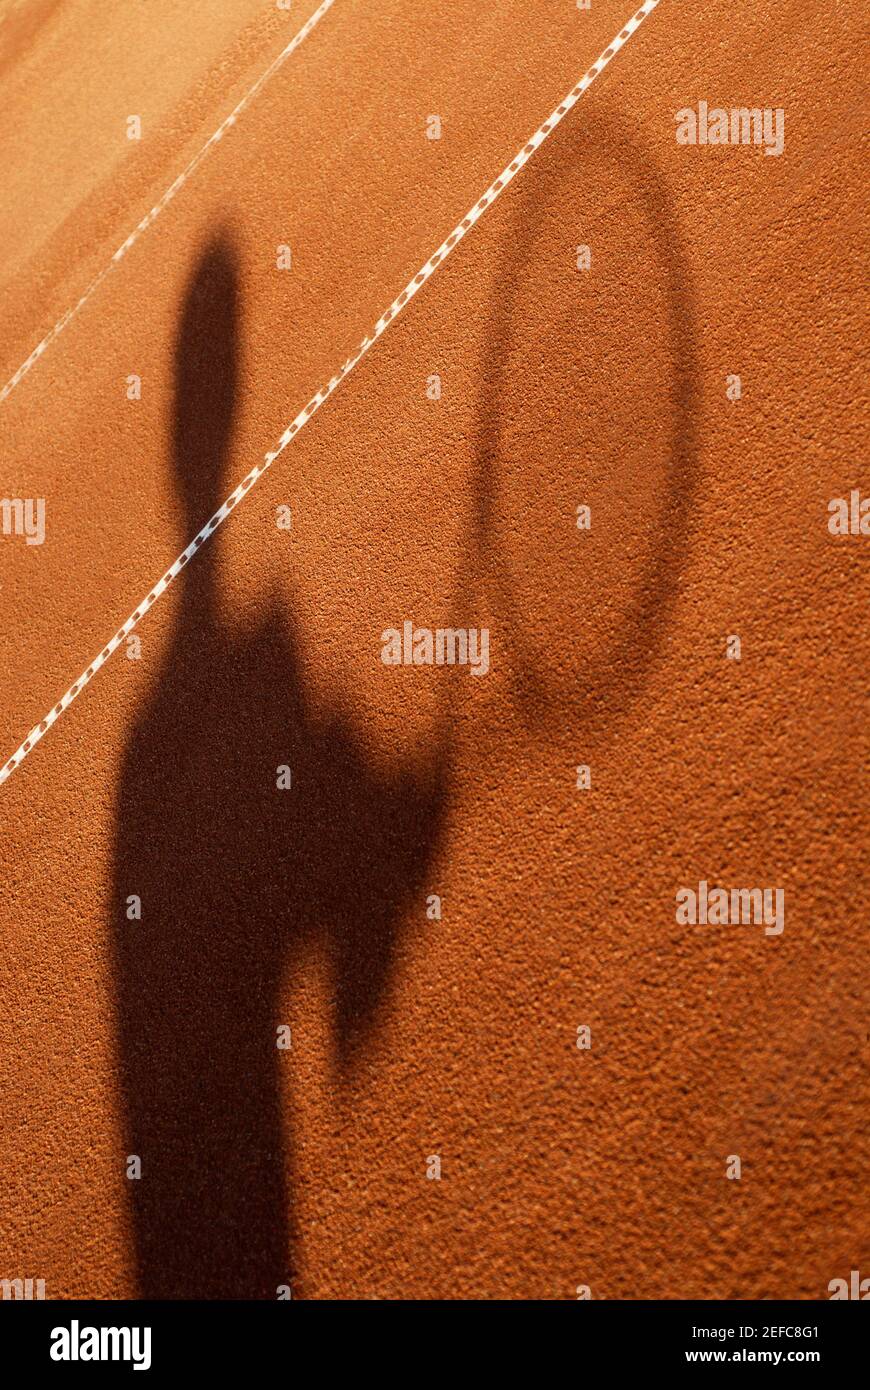 Shadow of a person holding a tennis racket Stock Photo